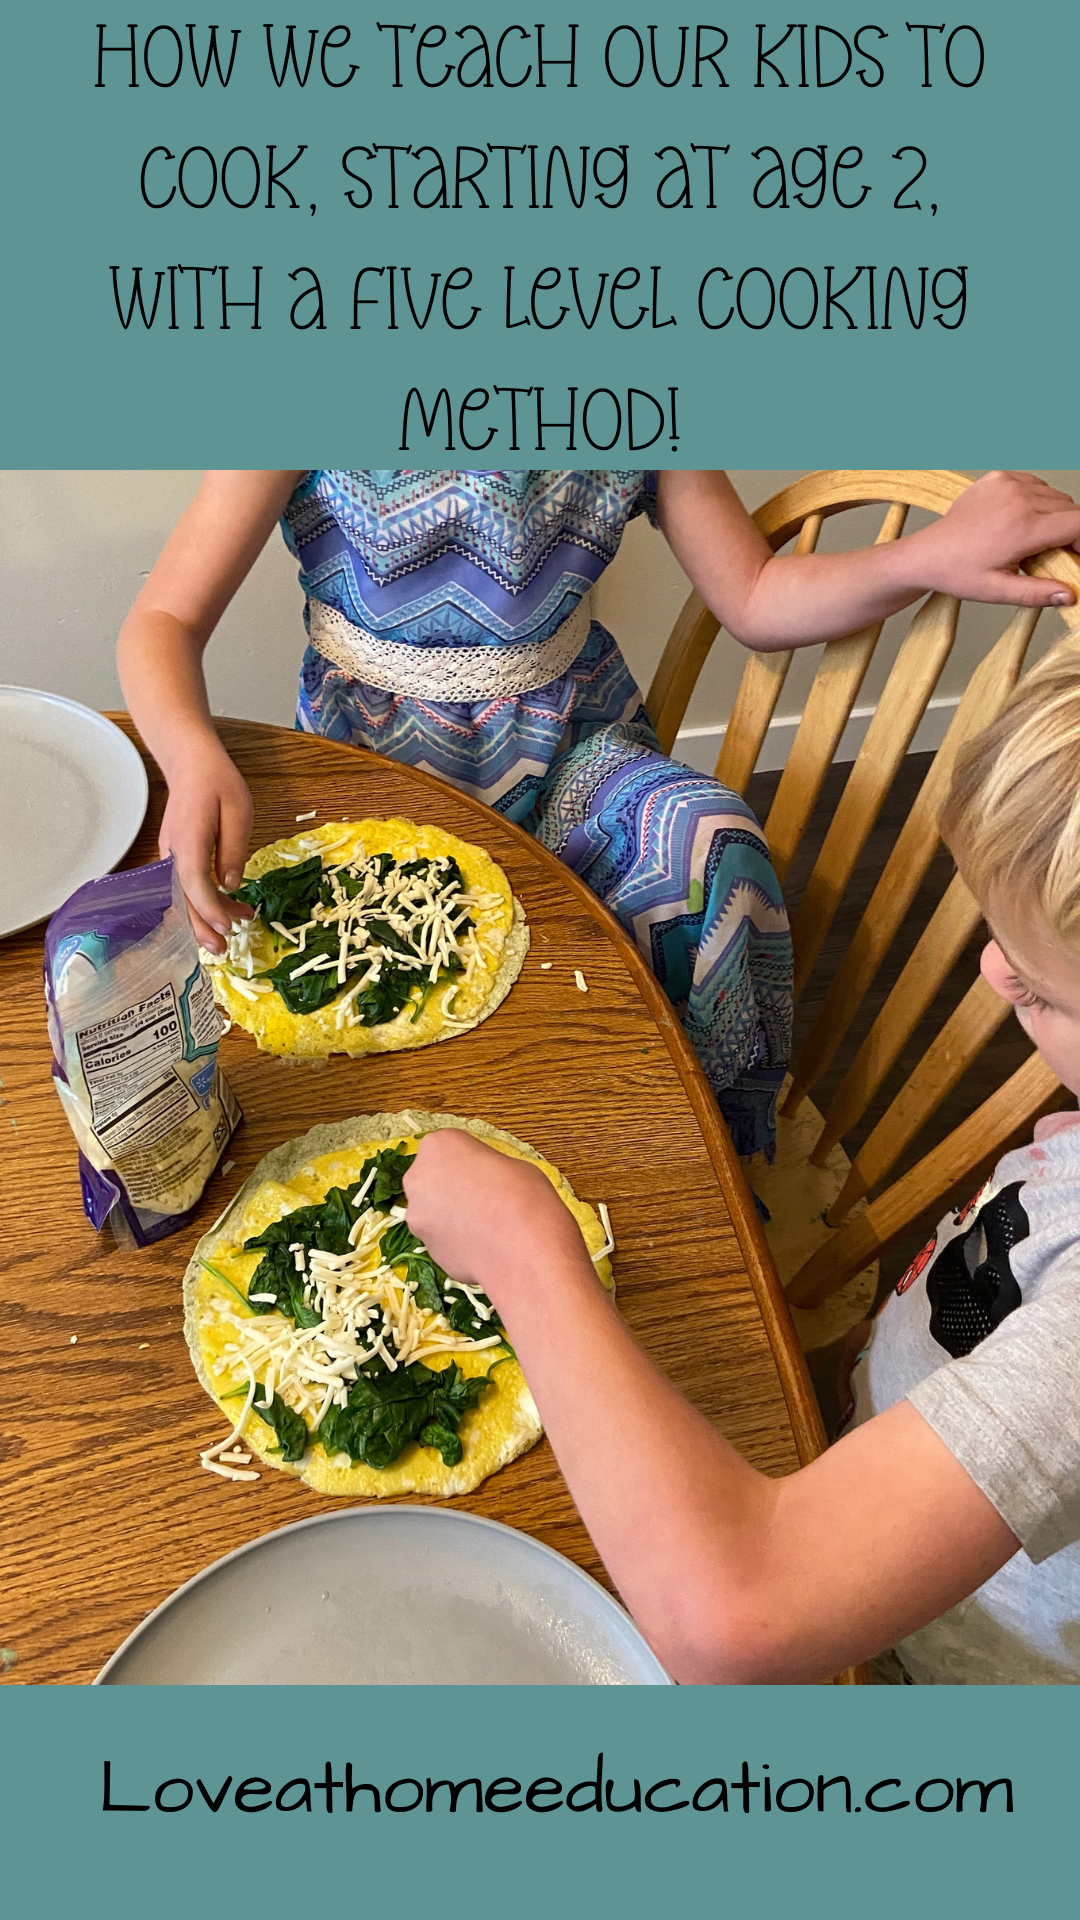 How we teach our kids to cook, starting at age 2, with a five level cooking method!